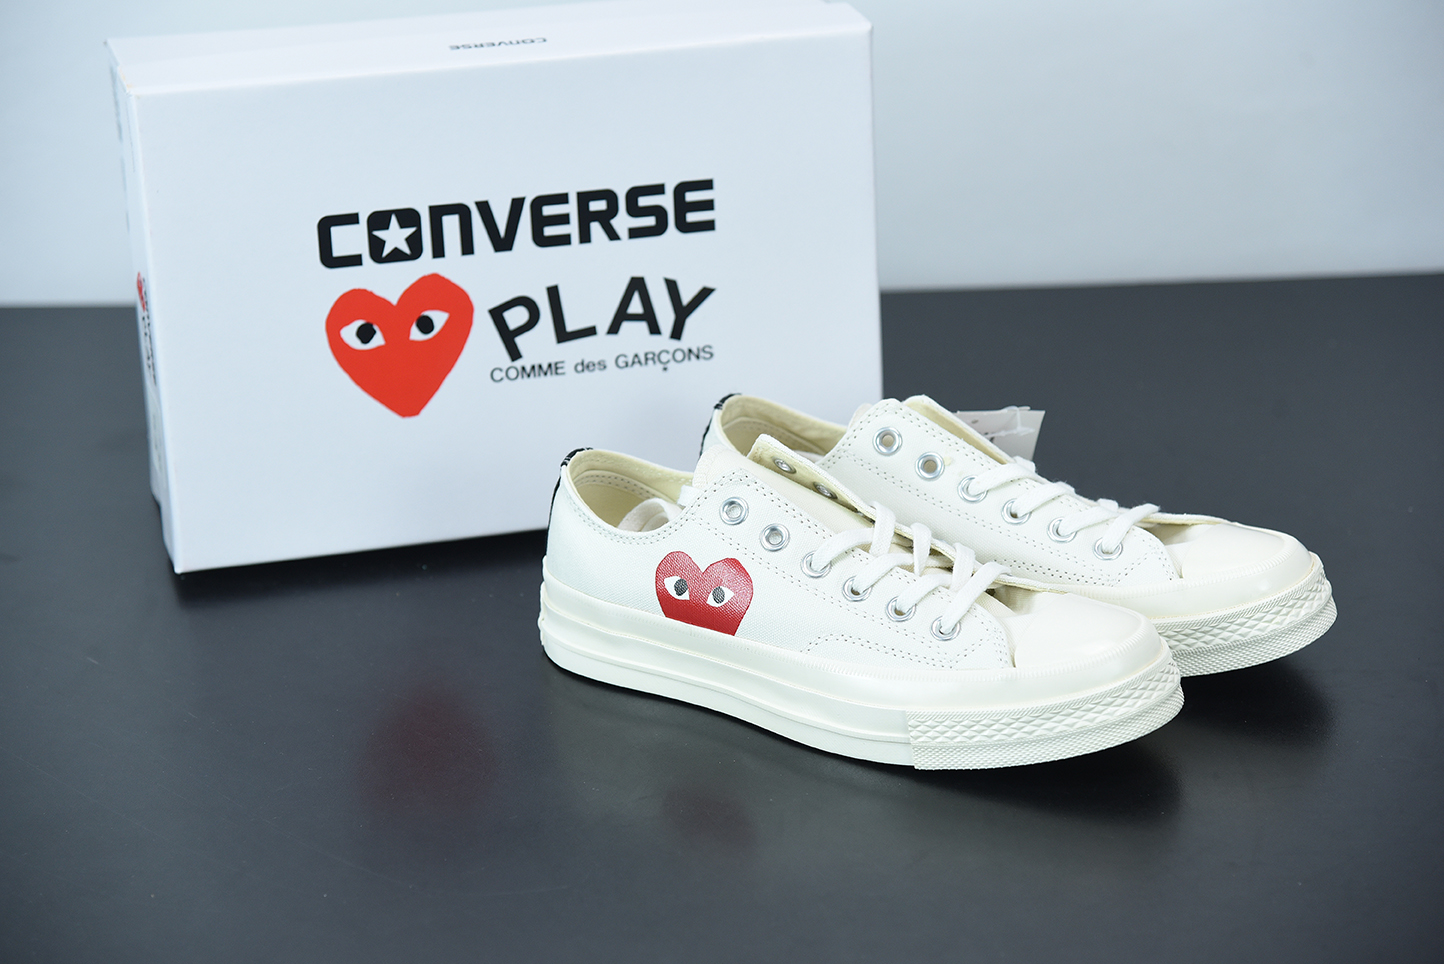 Viewer Græsse Plantation sneakers converse ctas hi 165190c champion tan white black - Star 70 Ox ' Play' Milk/White - CDG x Converse Chuck Taylor All - High Risk Red –  OnlinenevadaShops